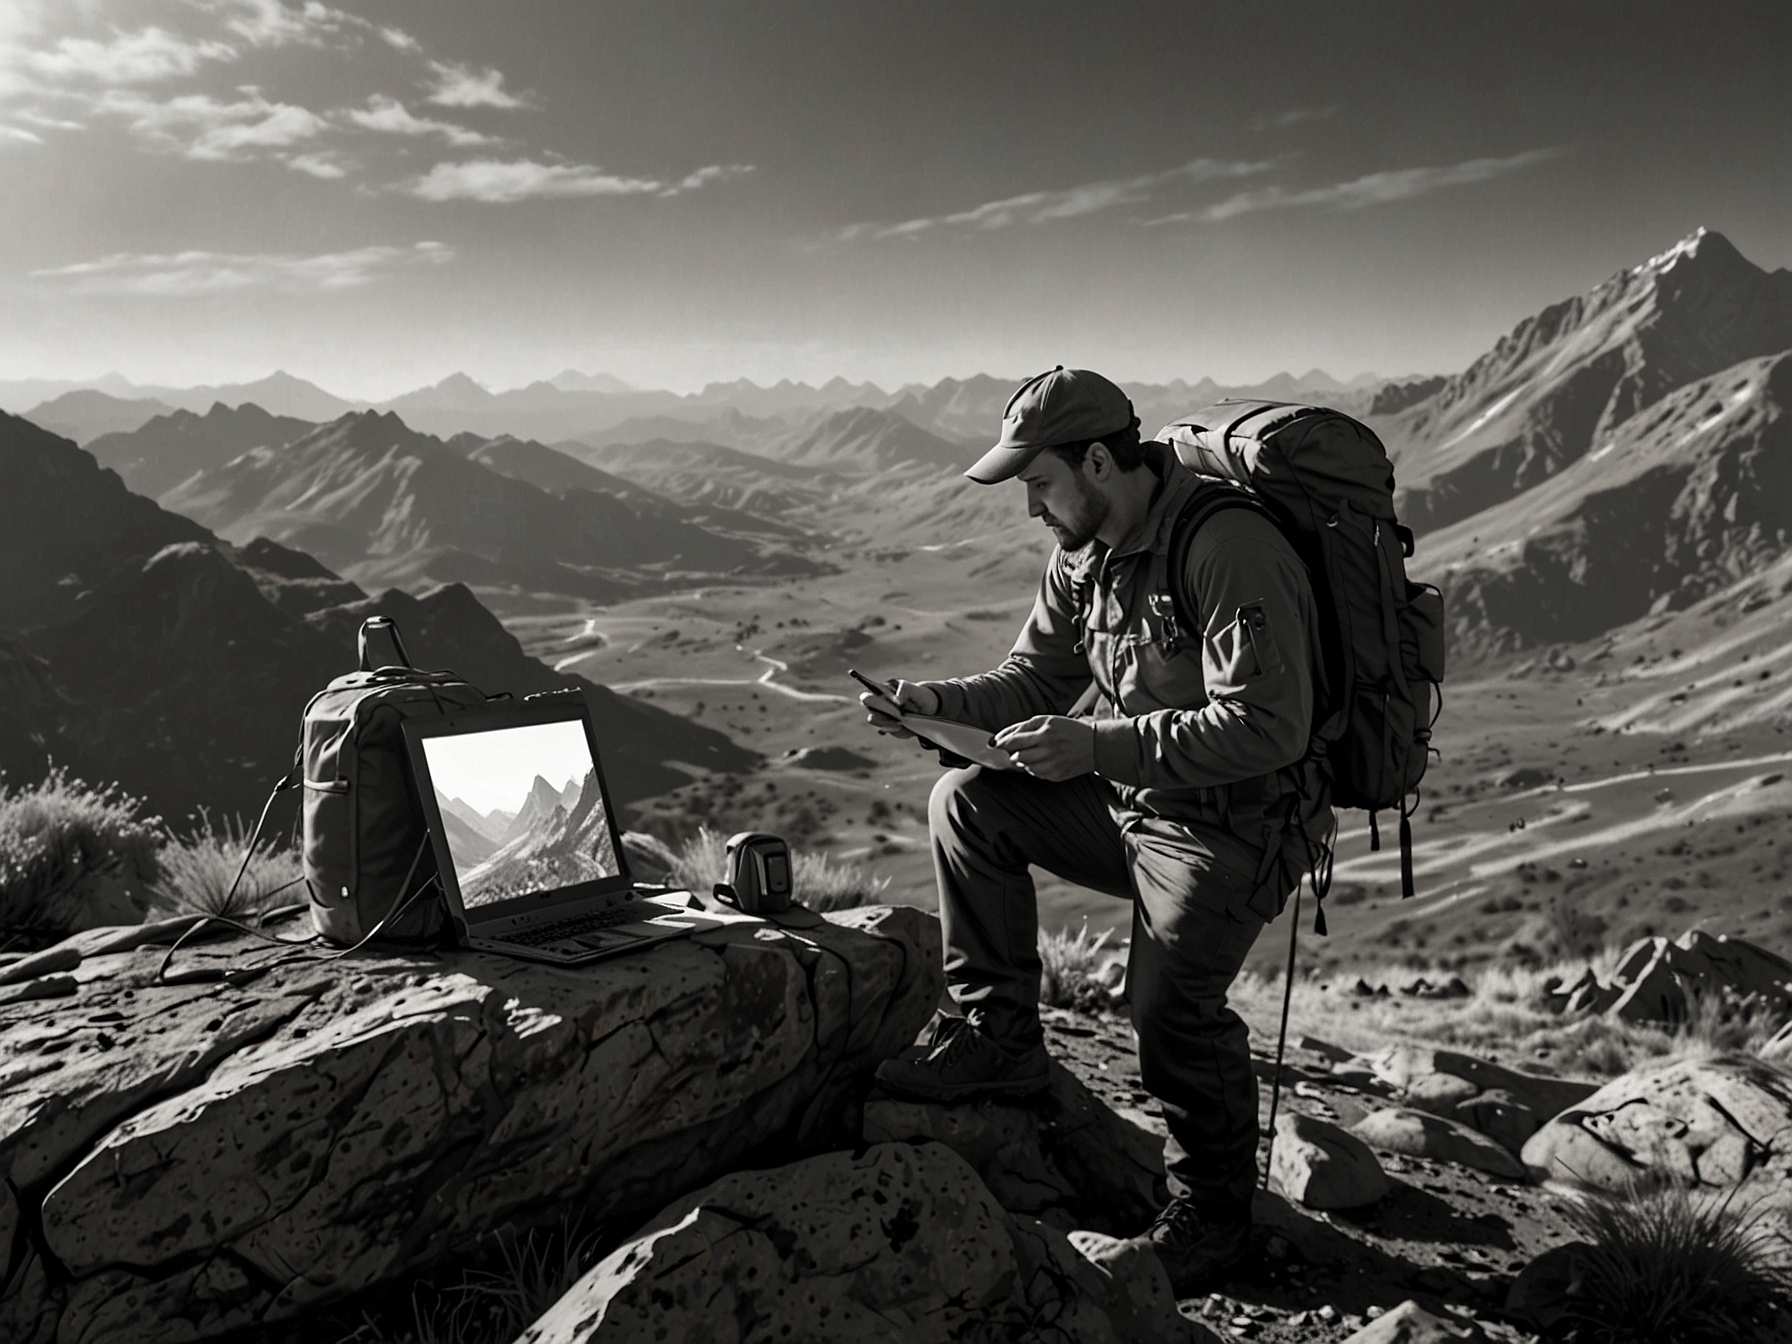 A hiker setting up the compact Starlink Mini device in a remote mountainous area, showcasing its portability and the promise of reliable internet connectivity even in secluded locations.